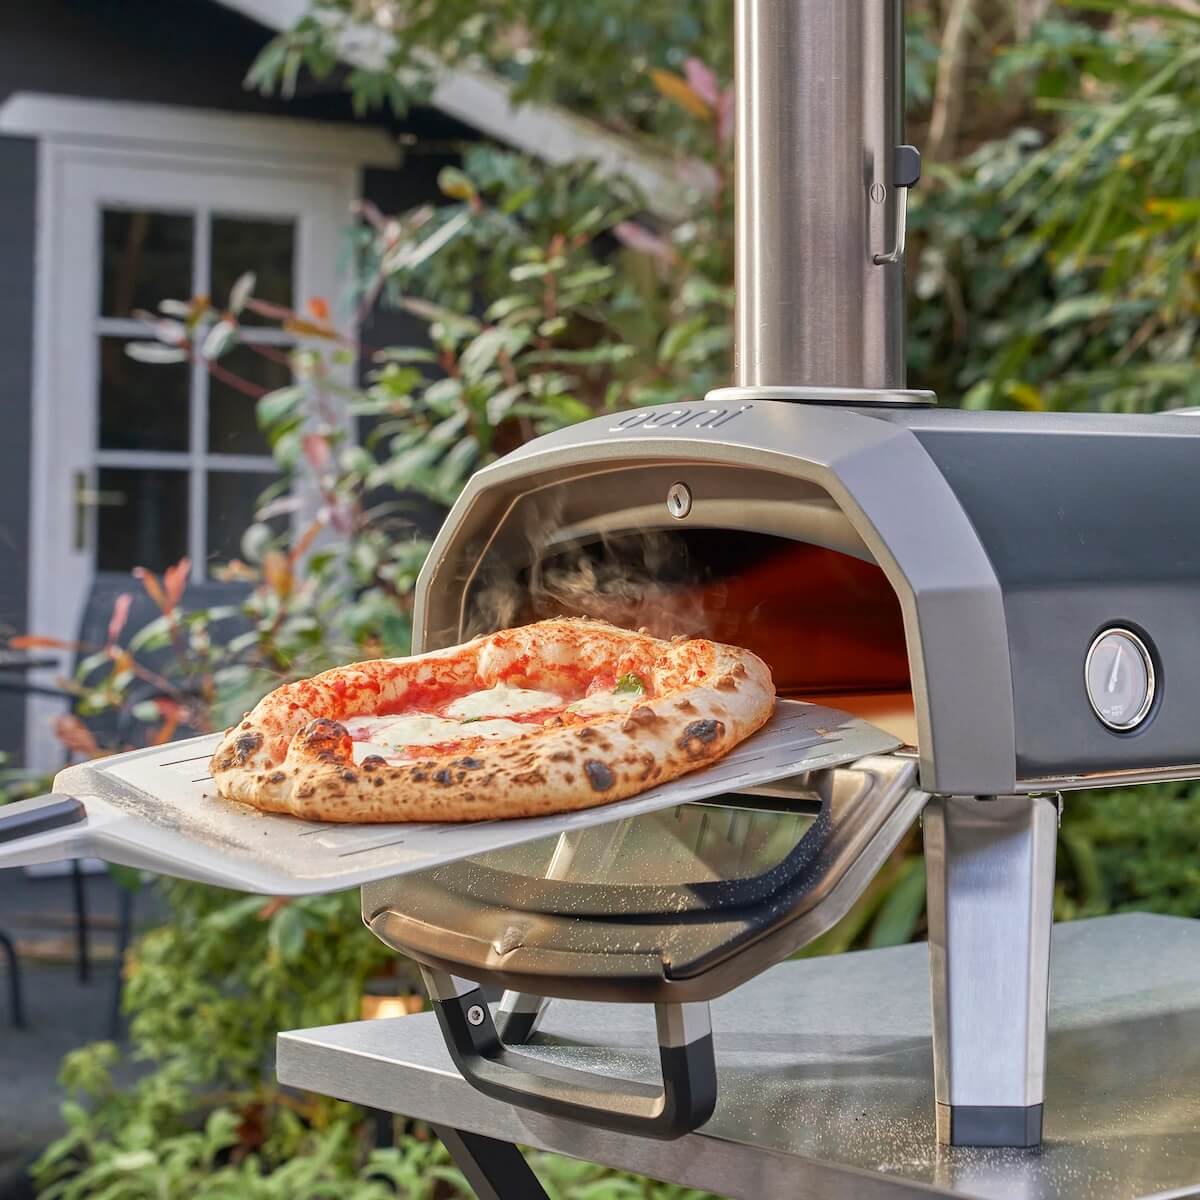 An Ooni Karu Pizza oven being used outside as a user slides a freshly baked margarita pizza out of its fiery inside